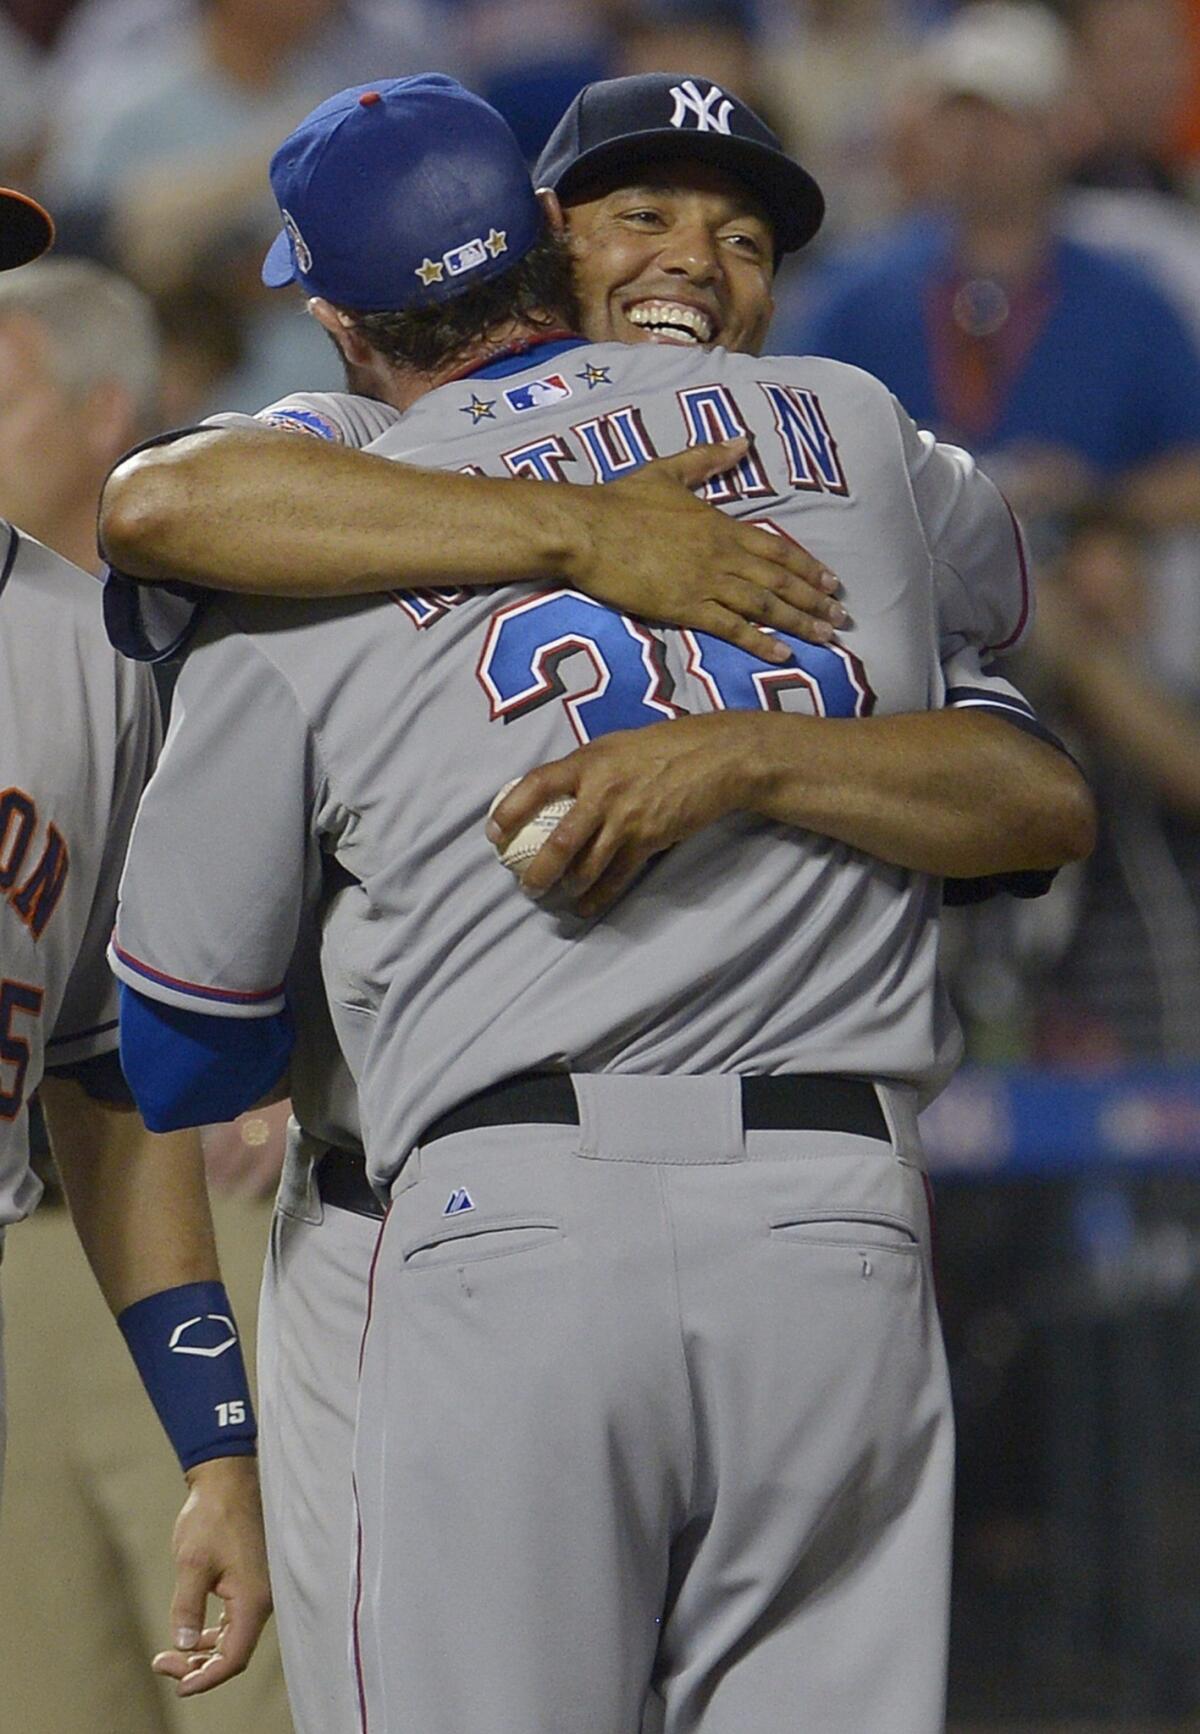 Texas Rangers reliever Joe Nathan is hugged by Mariano Rivera of the New York Yankees after closing out the American League's 3-0 victory over the National League in the MLB All-Star Game on Tuesday.